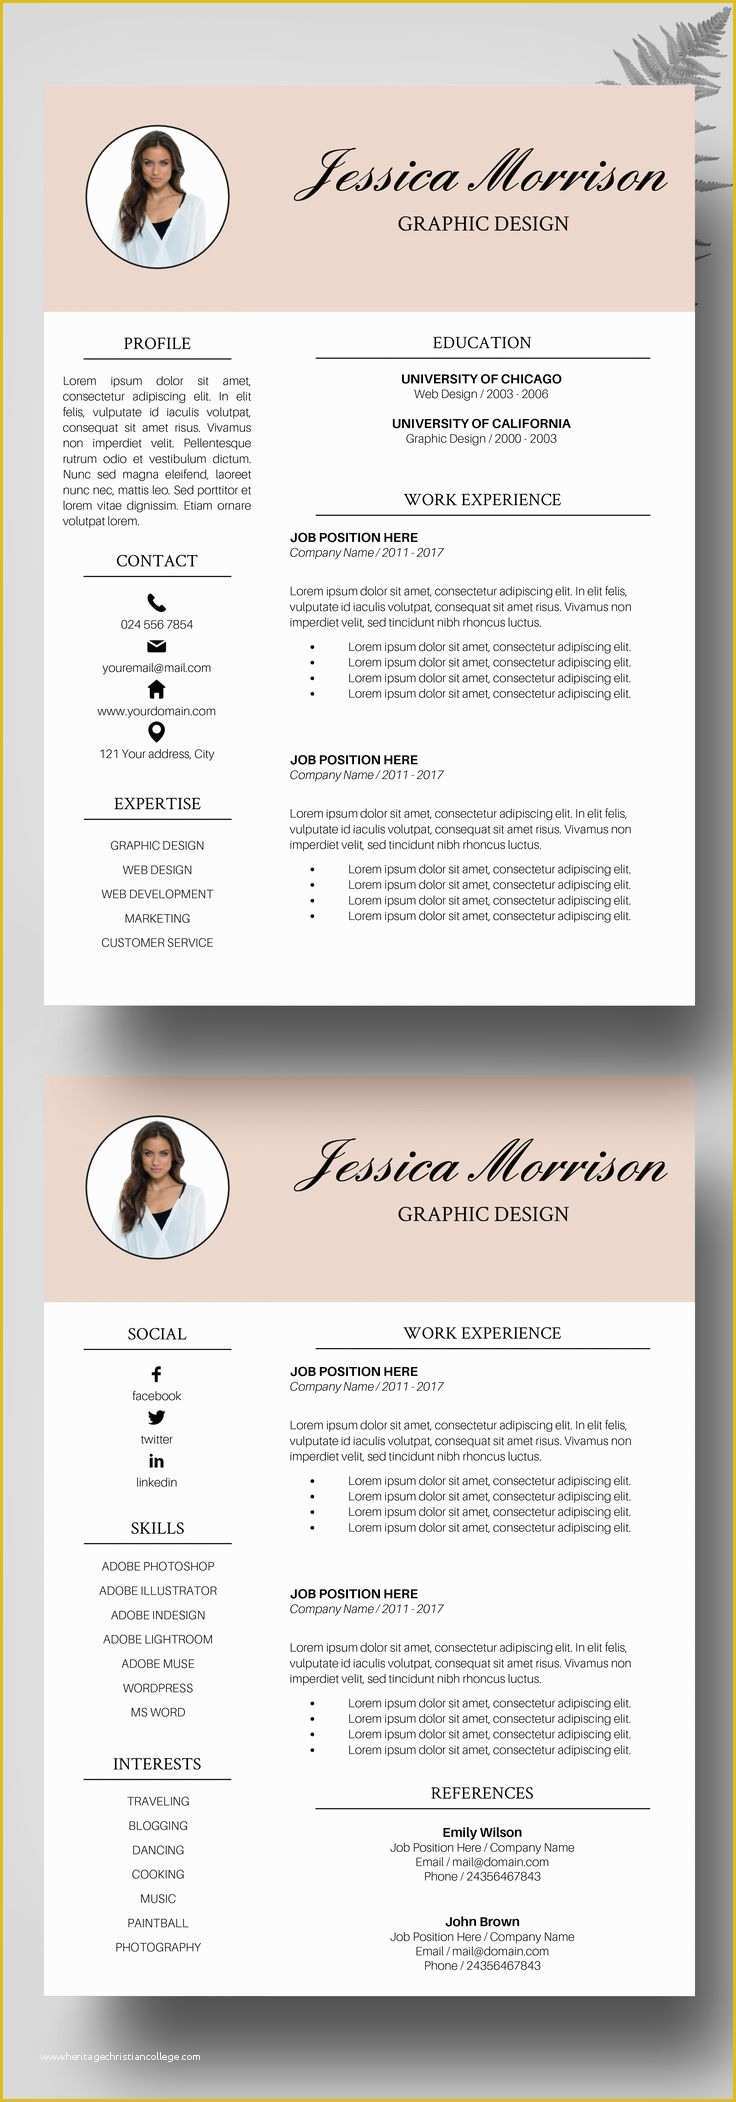 Best Free Cv Templates Of 17 Best Ideas About Resume Templates On Pinterest